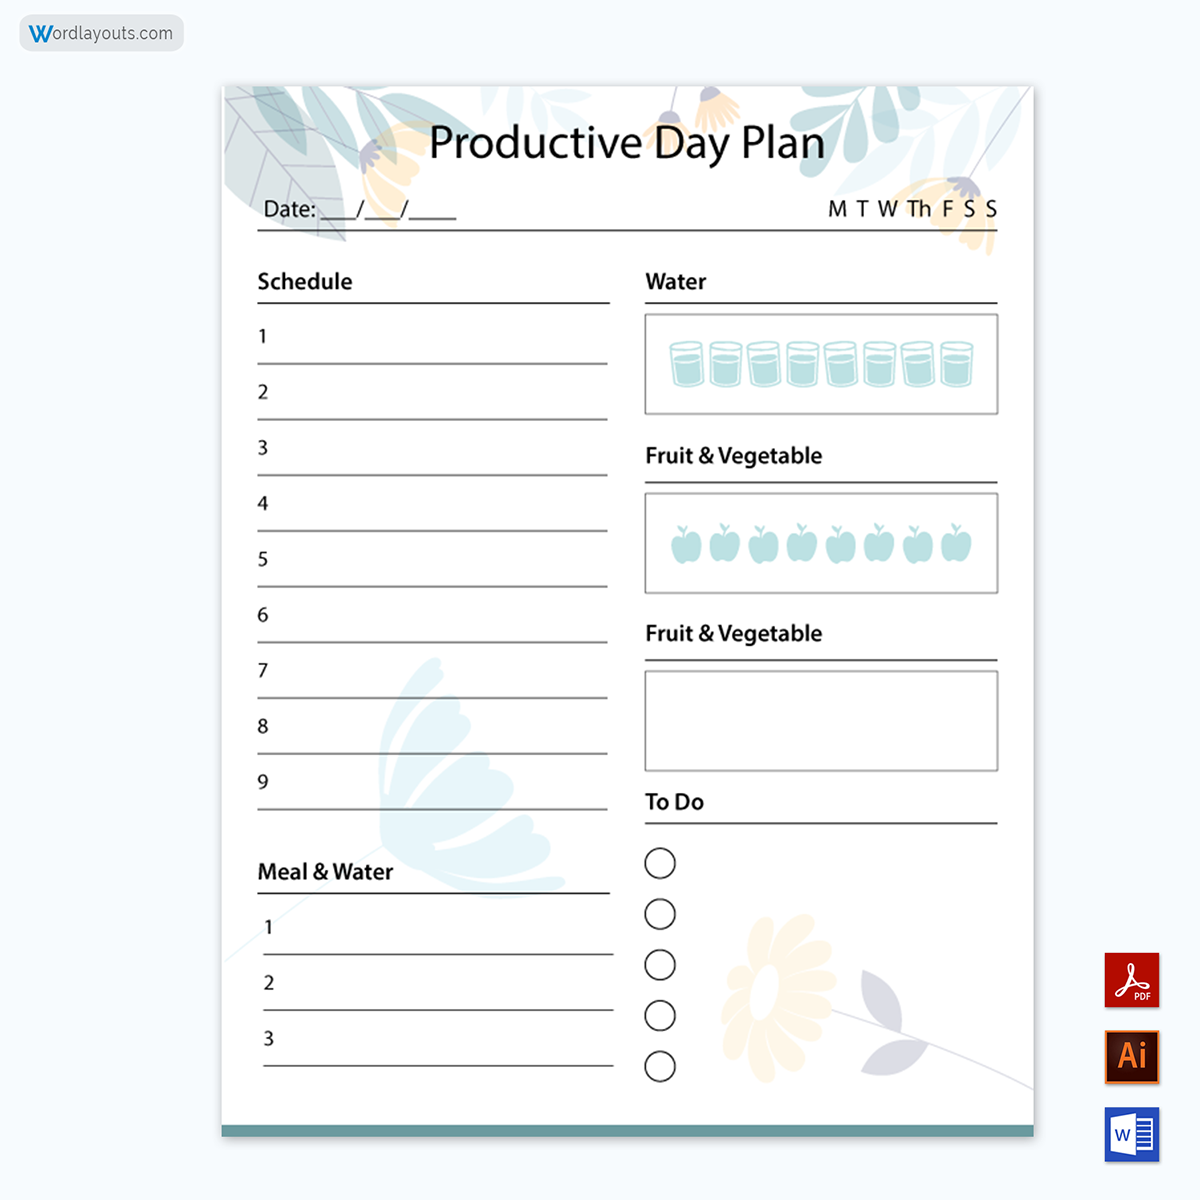 Daily-Planner-Template-8669ndnjp-06-23-p11